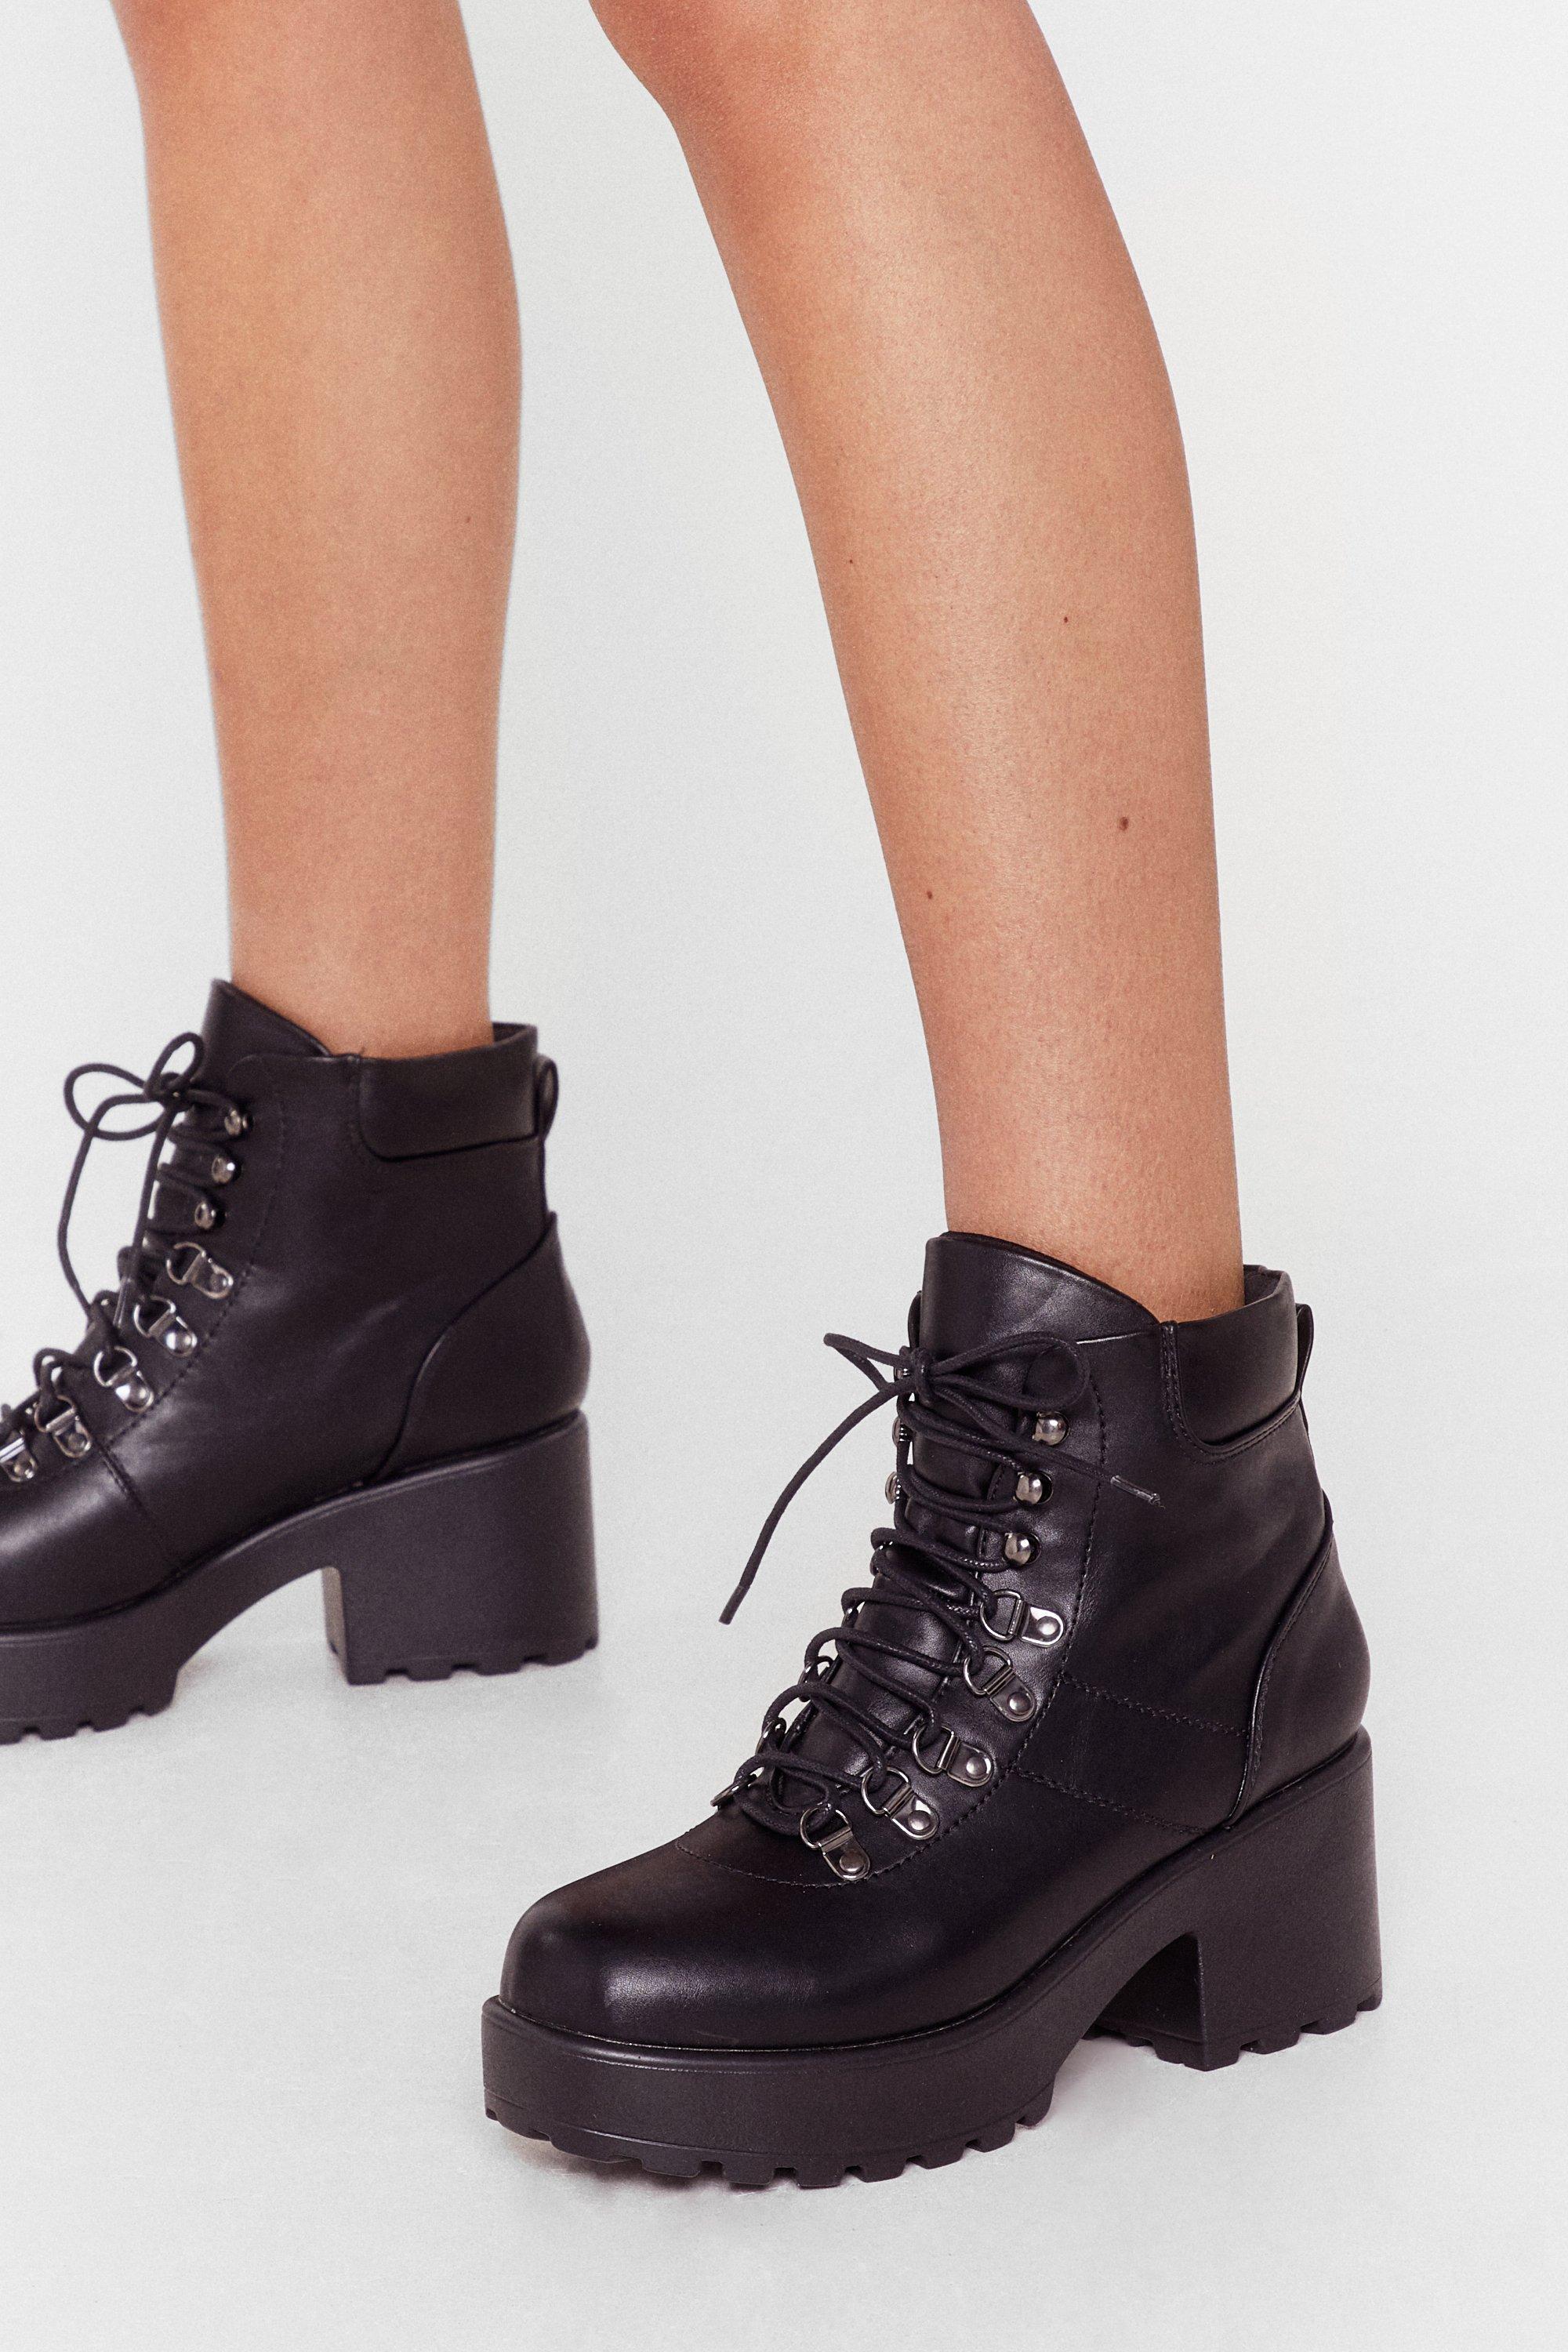 Details about   Women's Platform Lace Up Chunky High Heeled Clubwear Ankle Combat Boots Shoes 